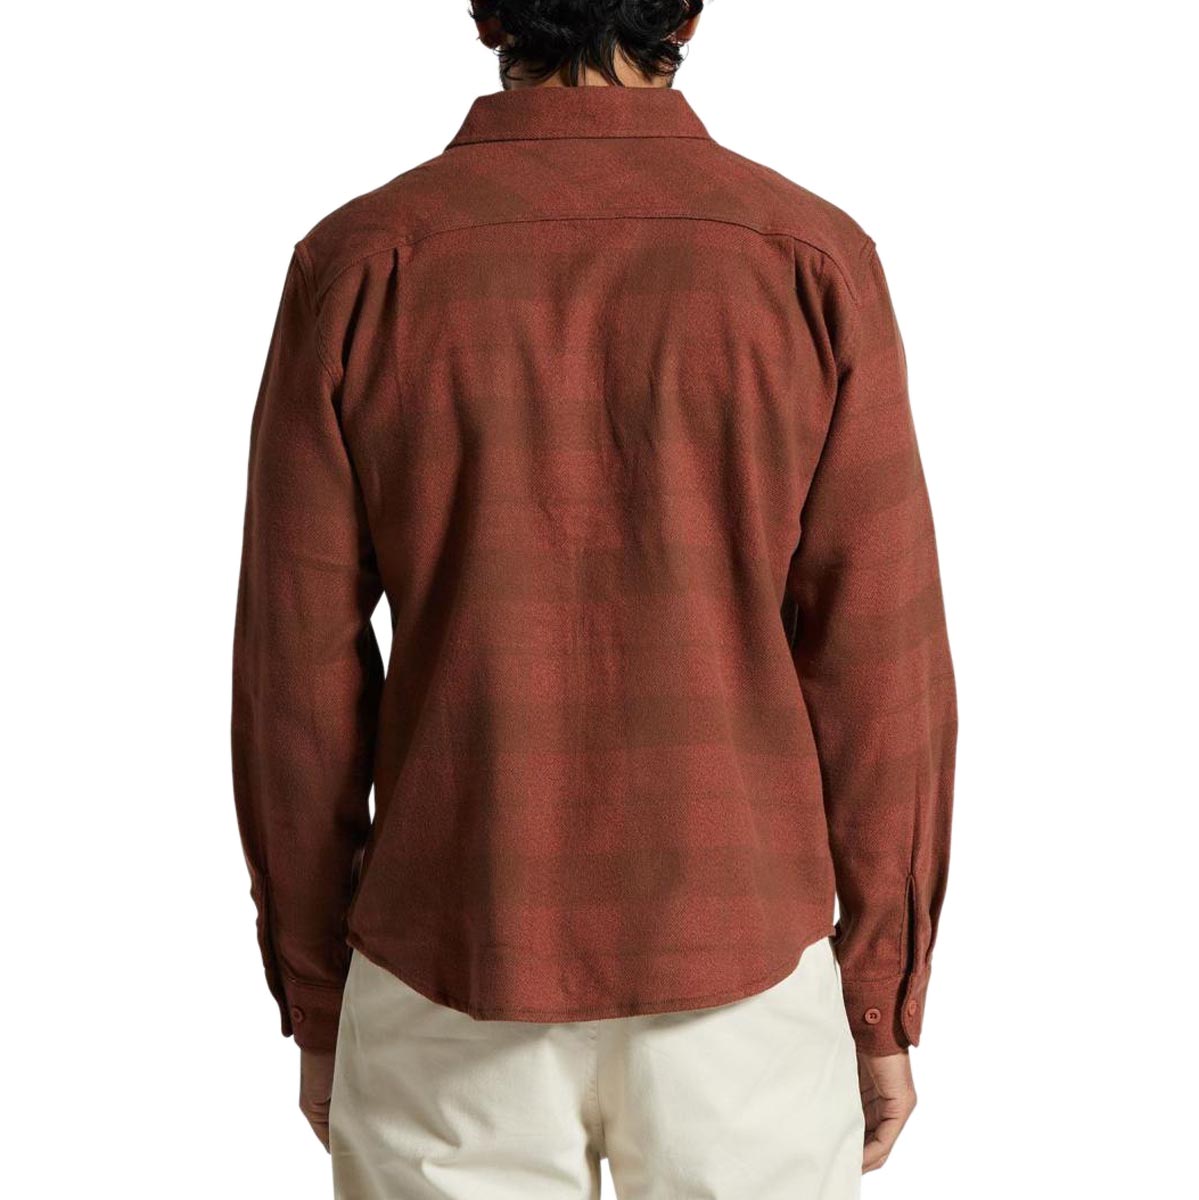 Brixton Bowery Stretch Water Resistant Flannel Shirt - Sepia/Terracotta image 2